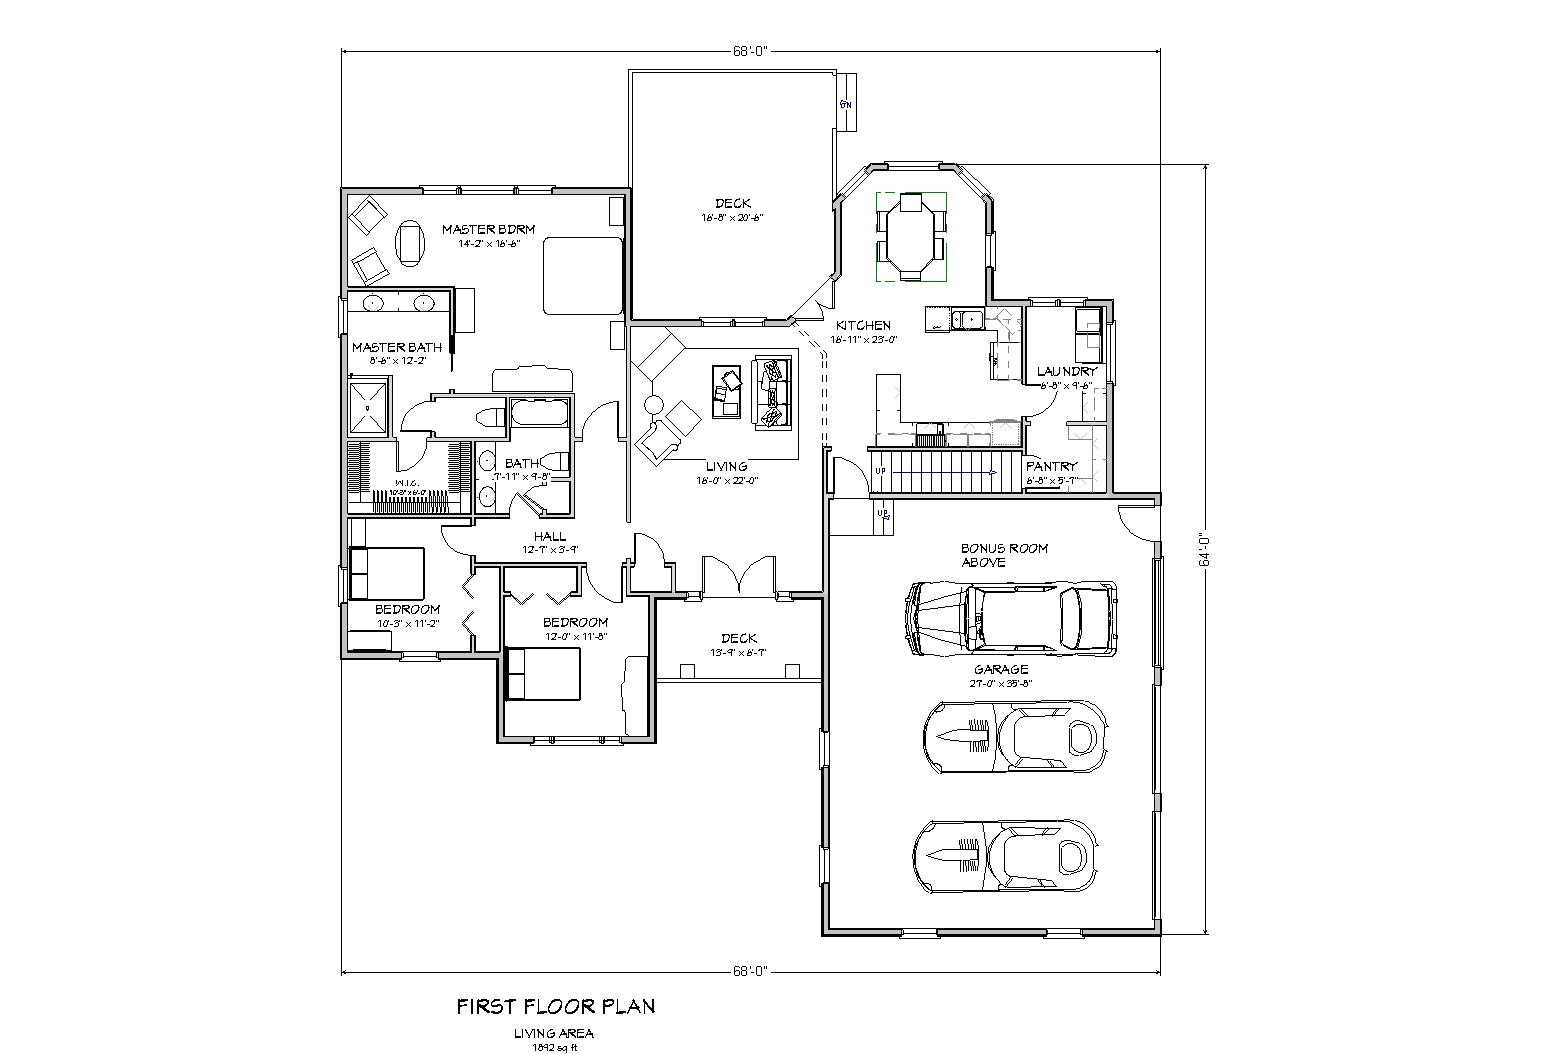 3 bedroom ranch style home with bonus room above garage house plans design